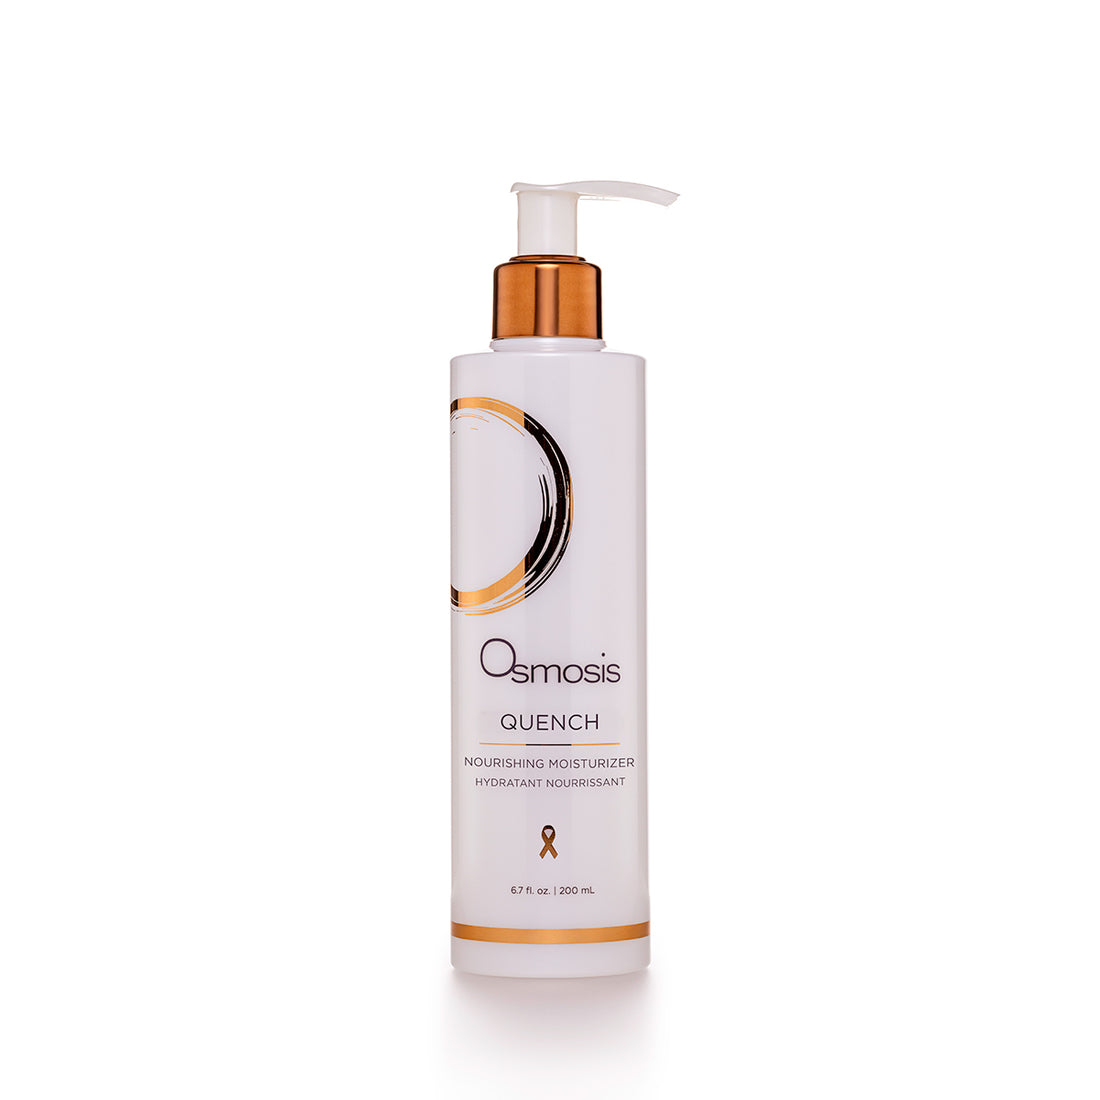 Osmosis Quench Nourishing Moisturizer is a perfect every day light moisturizer for all skin types.